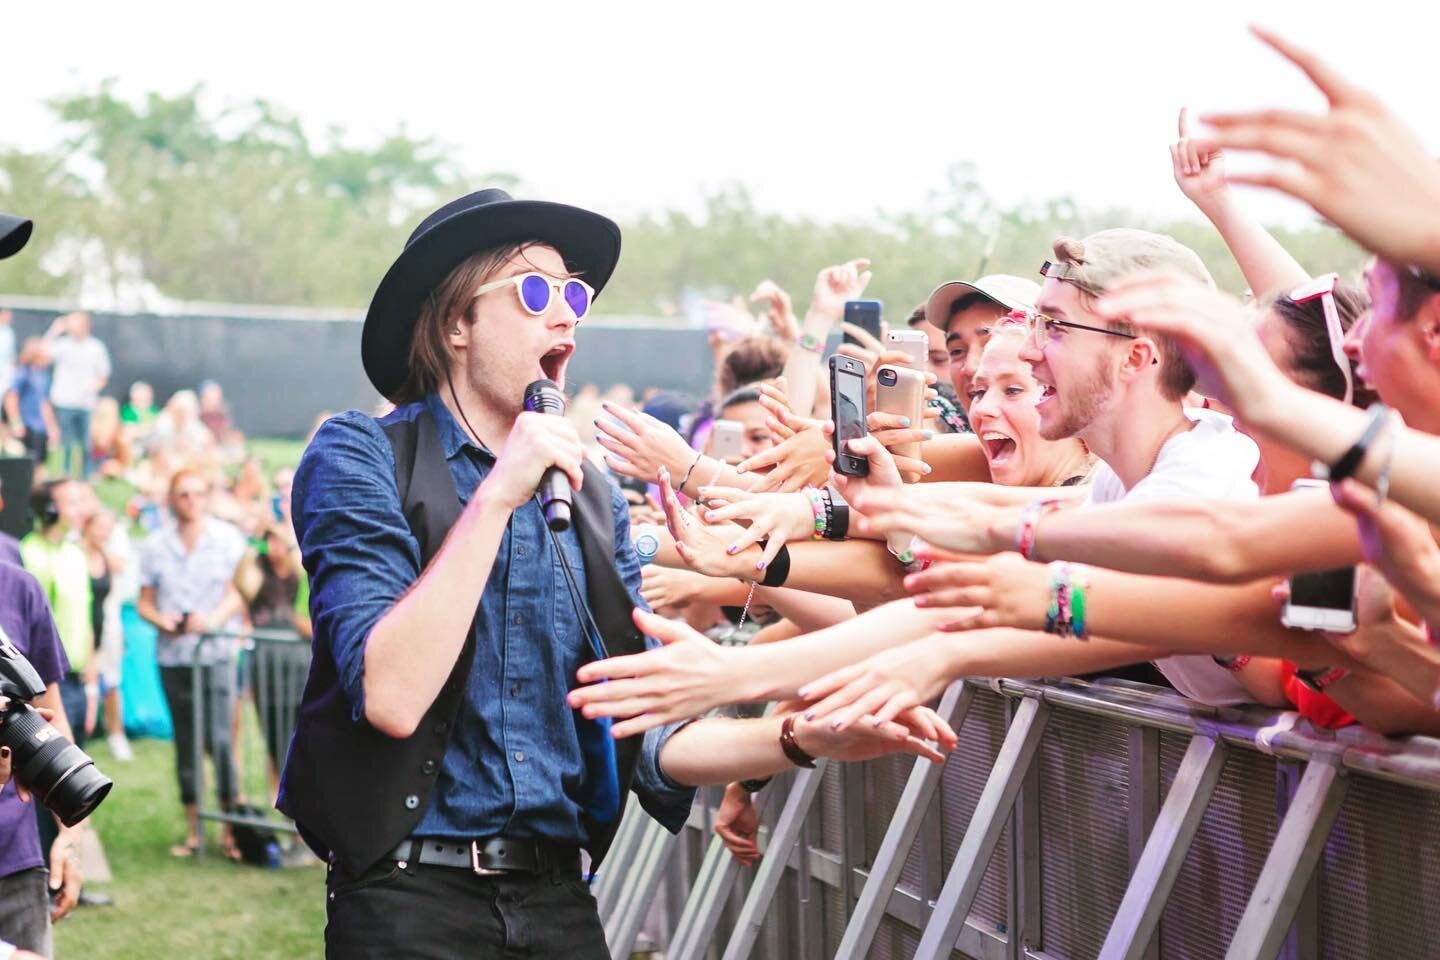 I miss concerts so so so much. I miss this energy. #livemusic #livemusicphotography #concerts #rocknroll #nothinglikeit #energy #feelingit #lollapalooza #saintmotel #summer #jamieskripacphotography